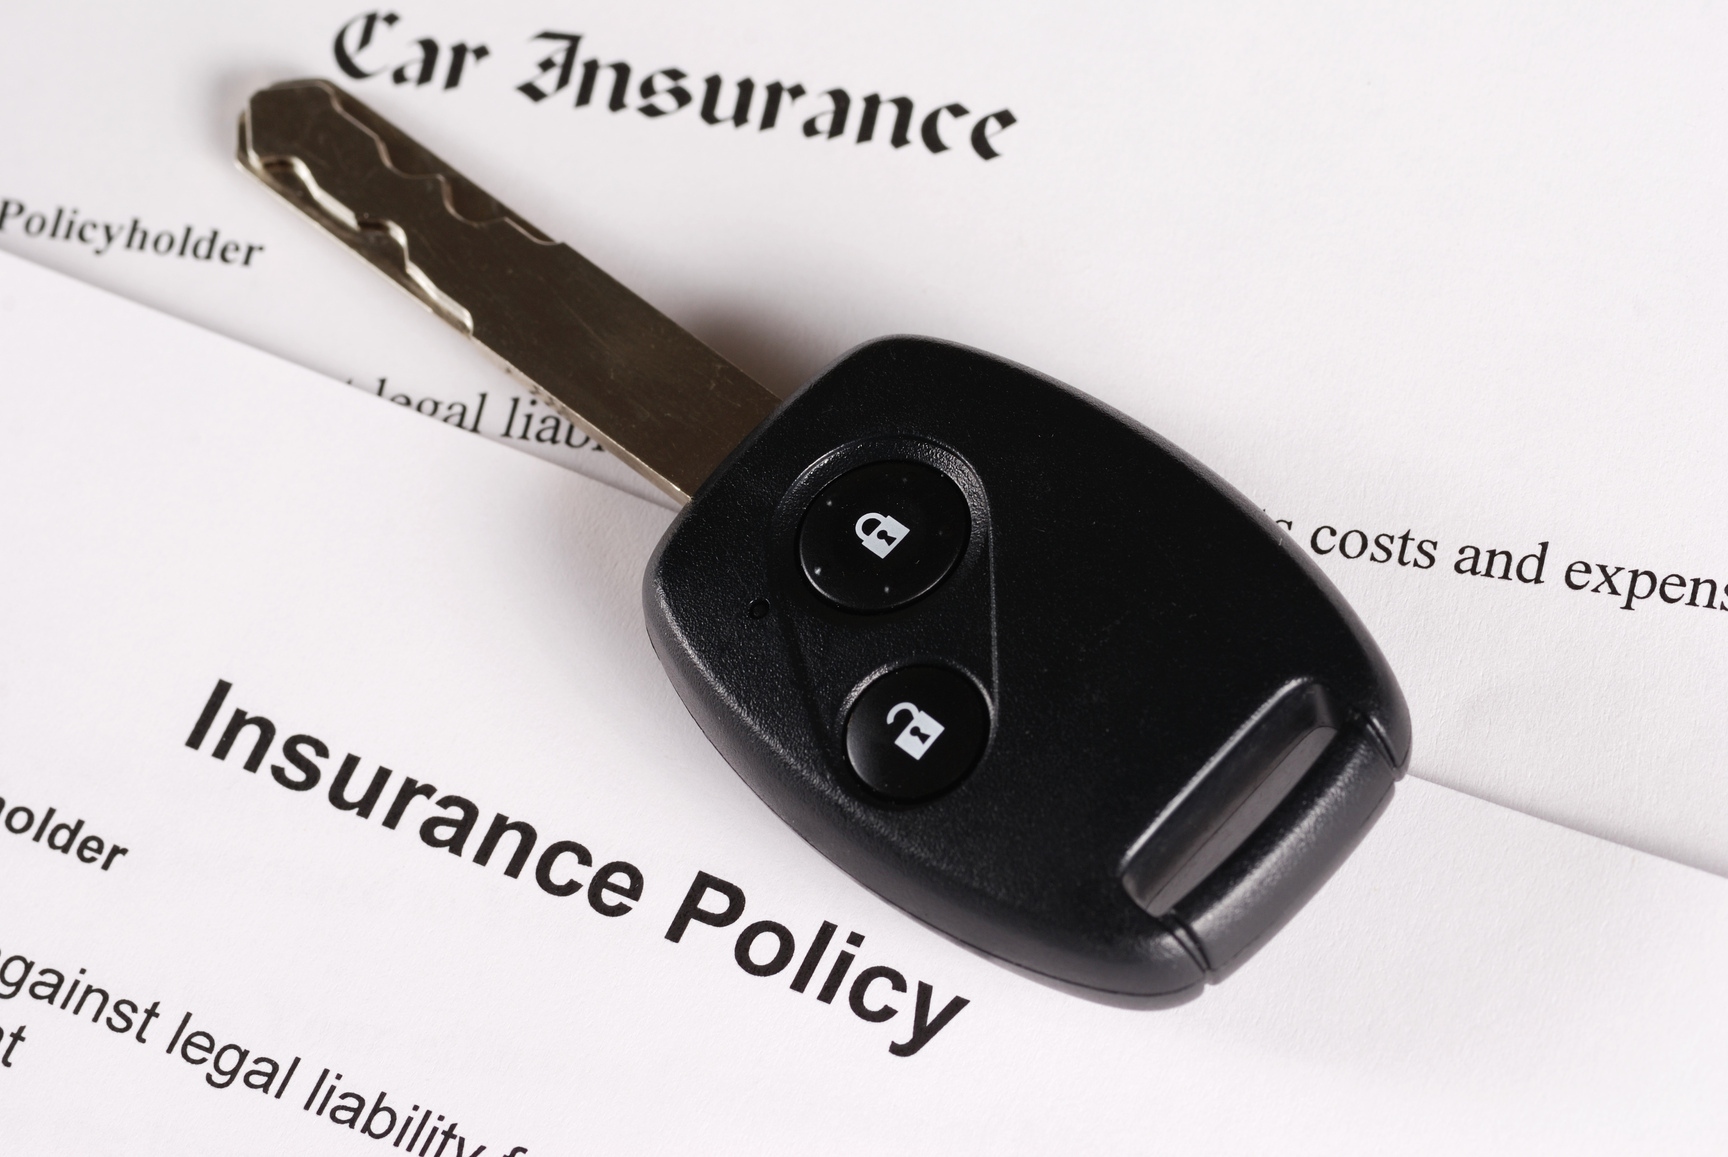 Shop Around for the Best Car Insurance Policy